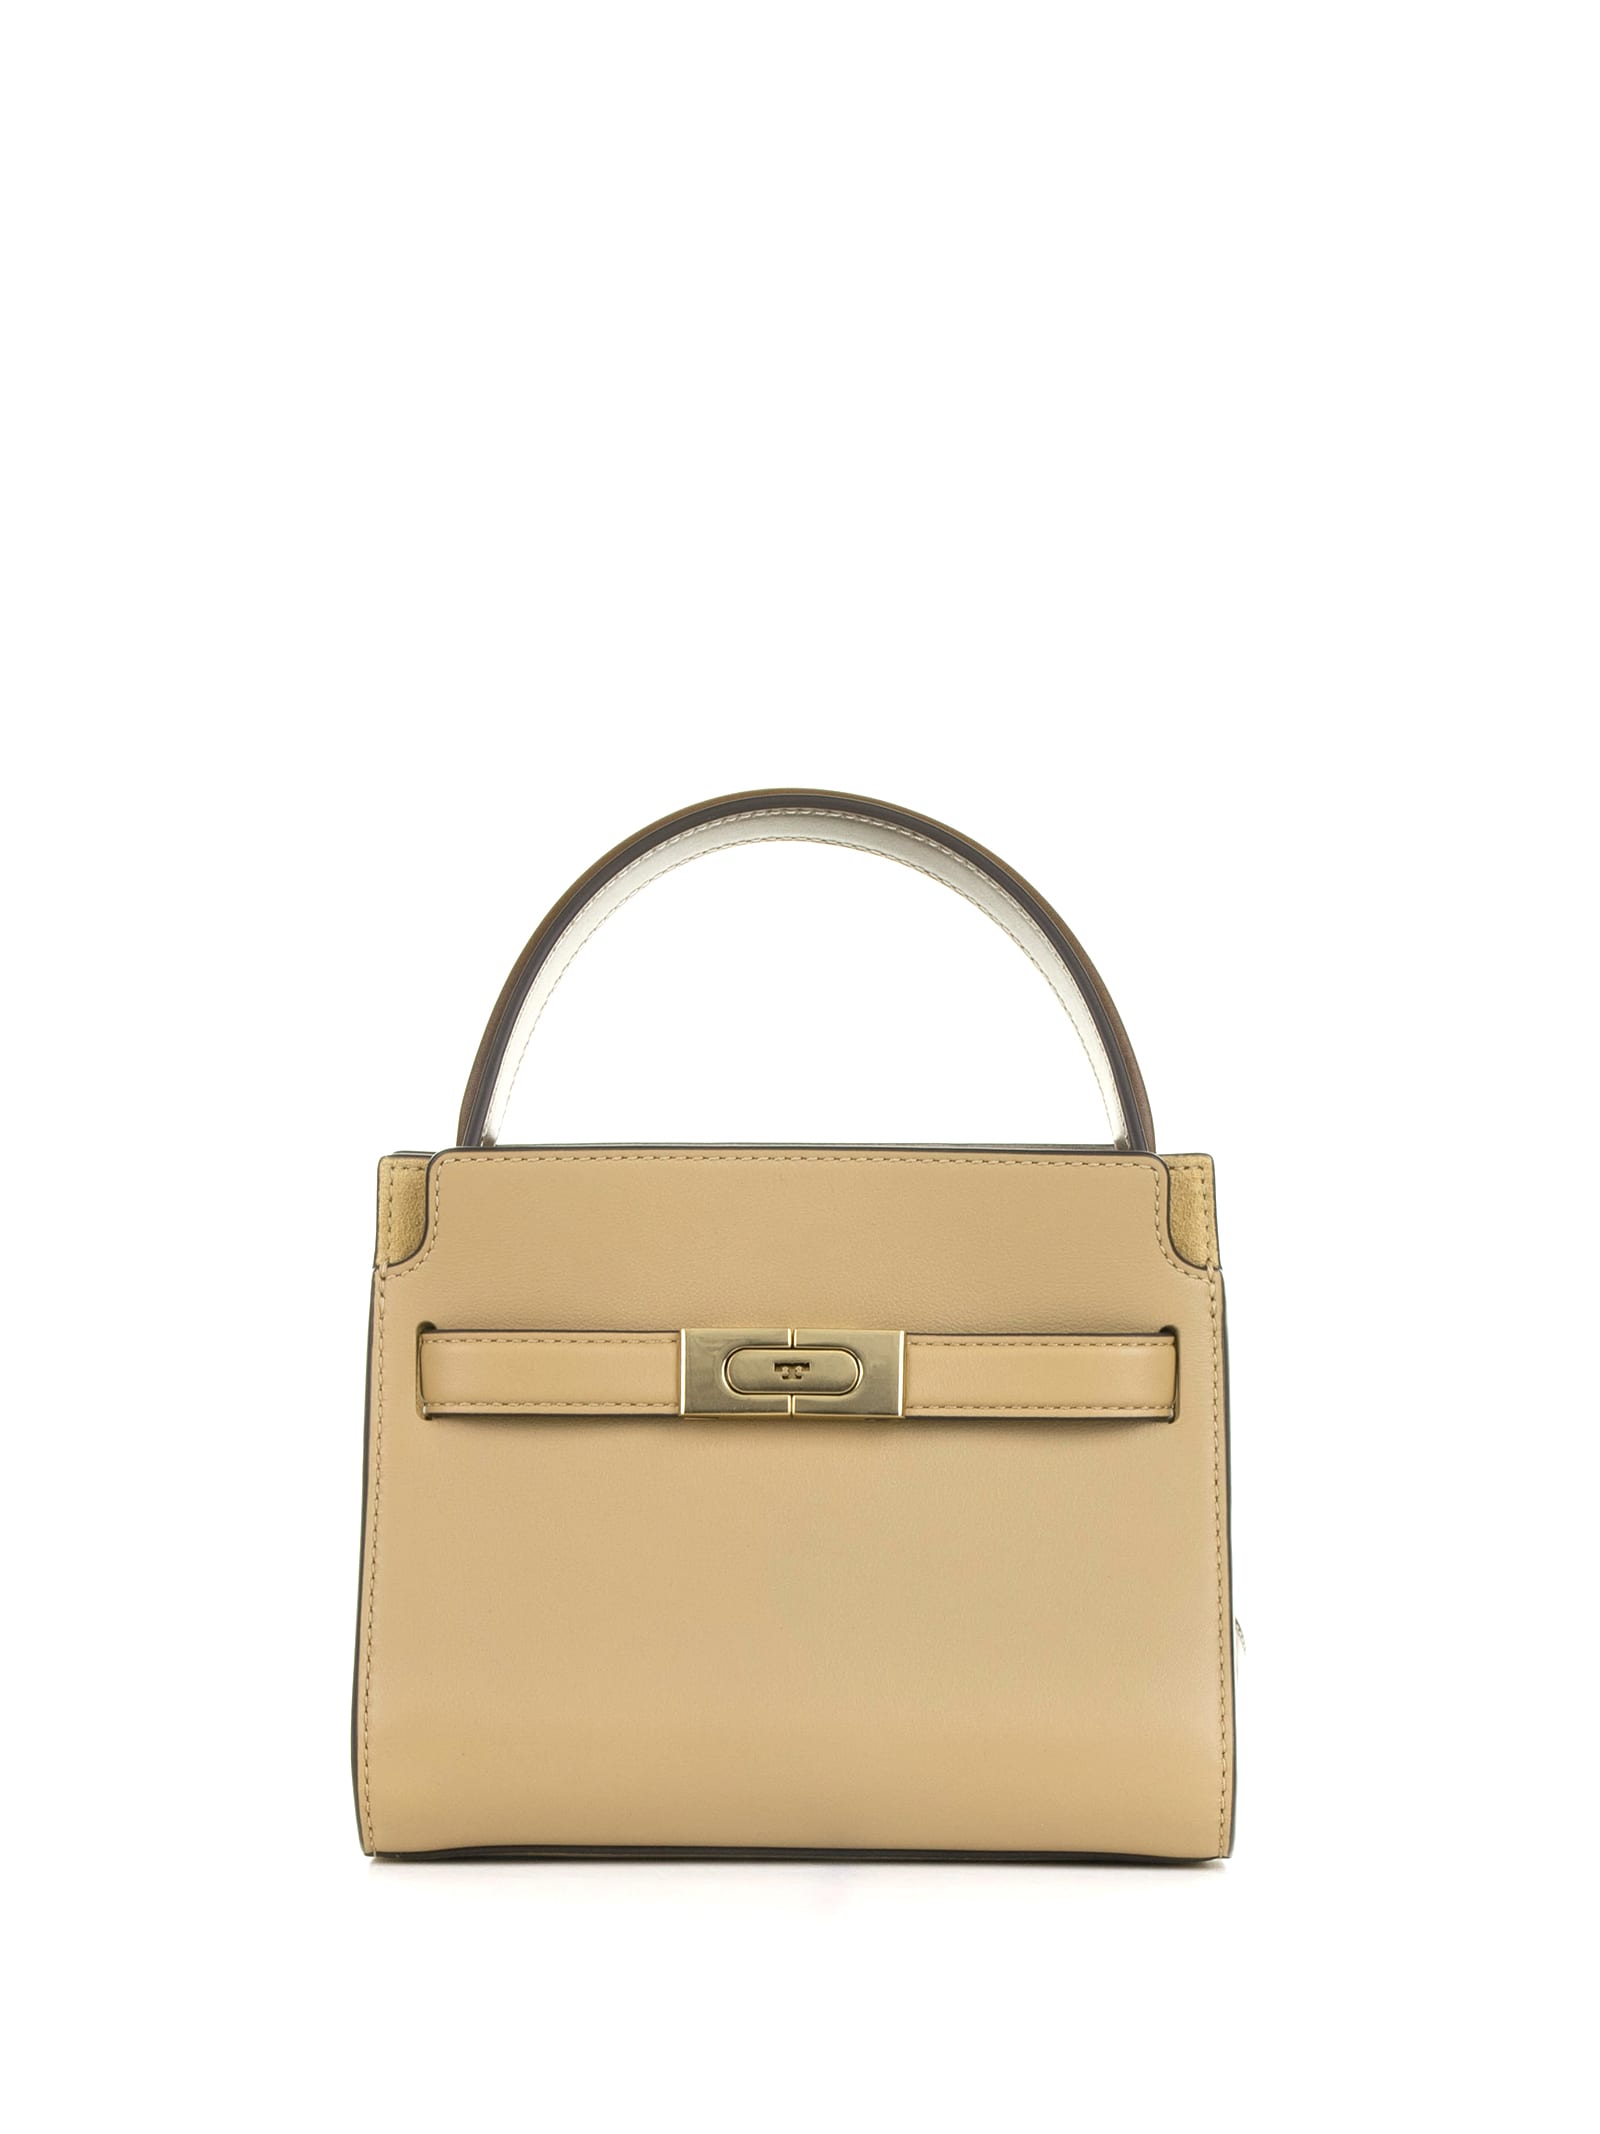 Shop Tory Burch Petite Double Lee Radziwill Bag In Leather In Dark Sand